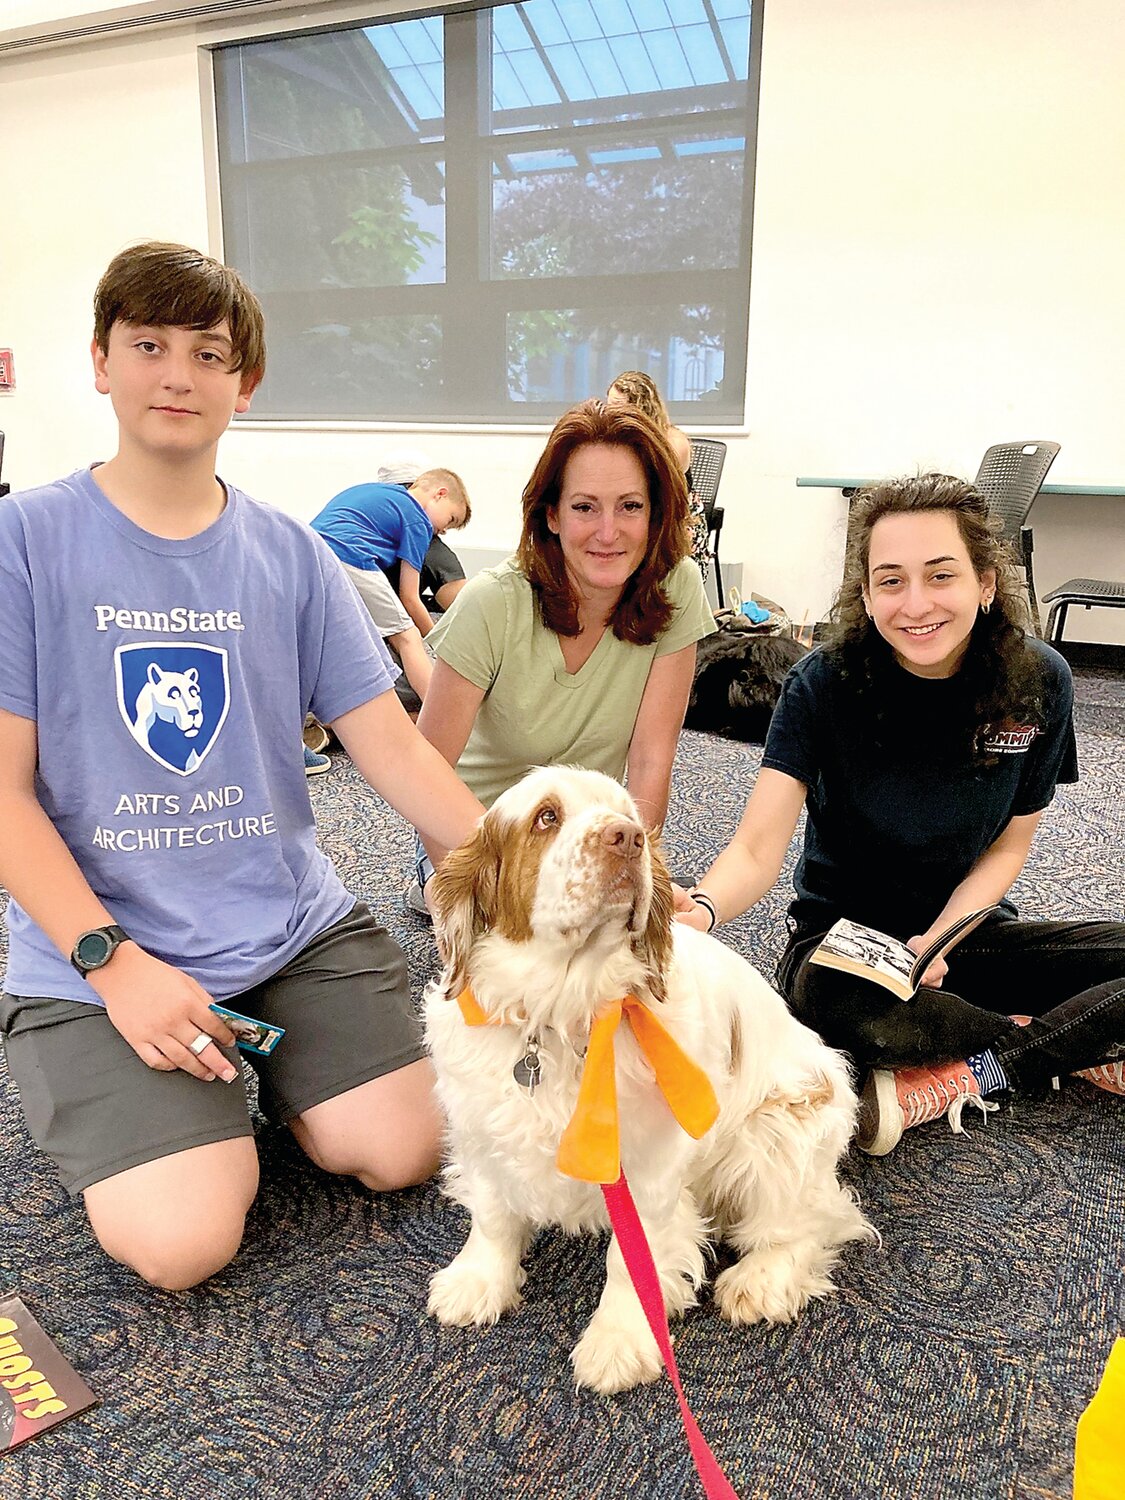 Reading to the Dogs begins again Sept. 9, in the Pearl Buck Room of the Doylestown Library. The Friends of the Doylestown Library is encouraging all members of the family to join in and read to the therapy dogs.